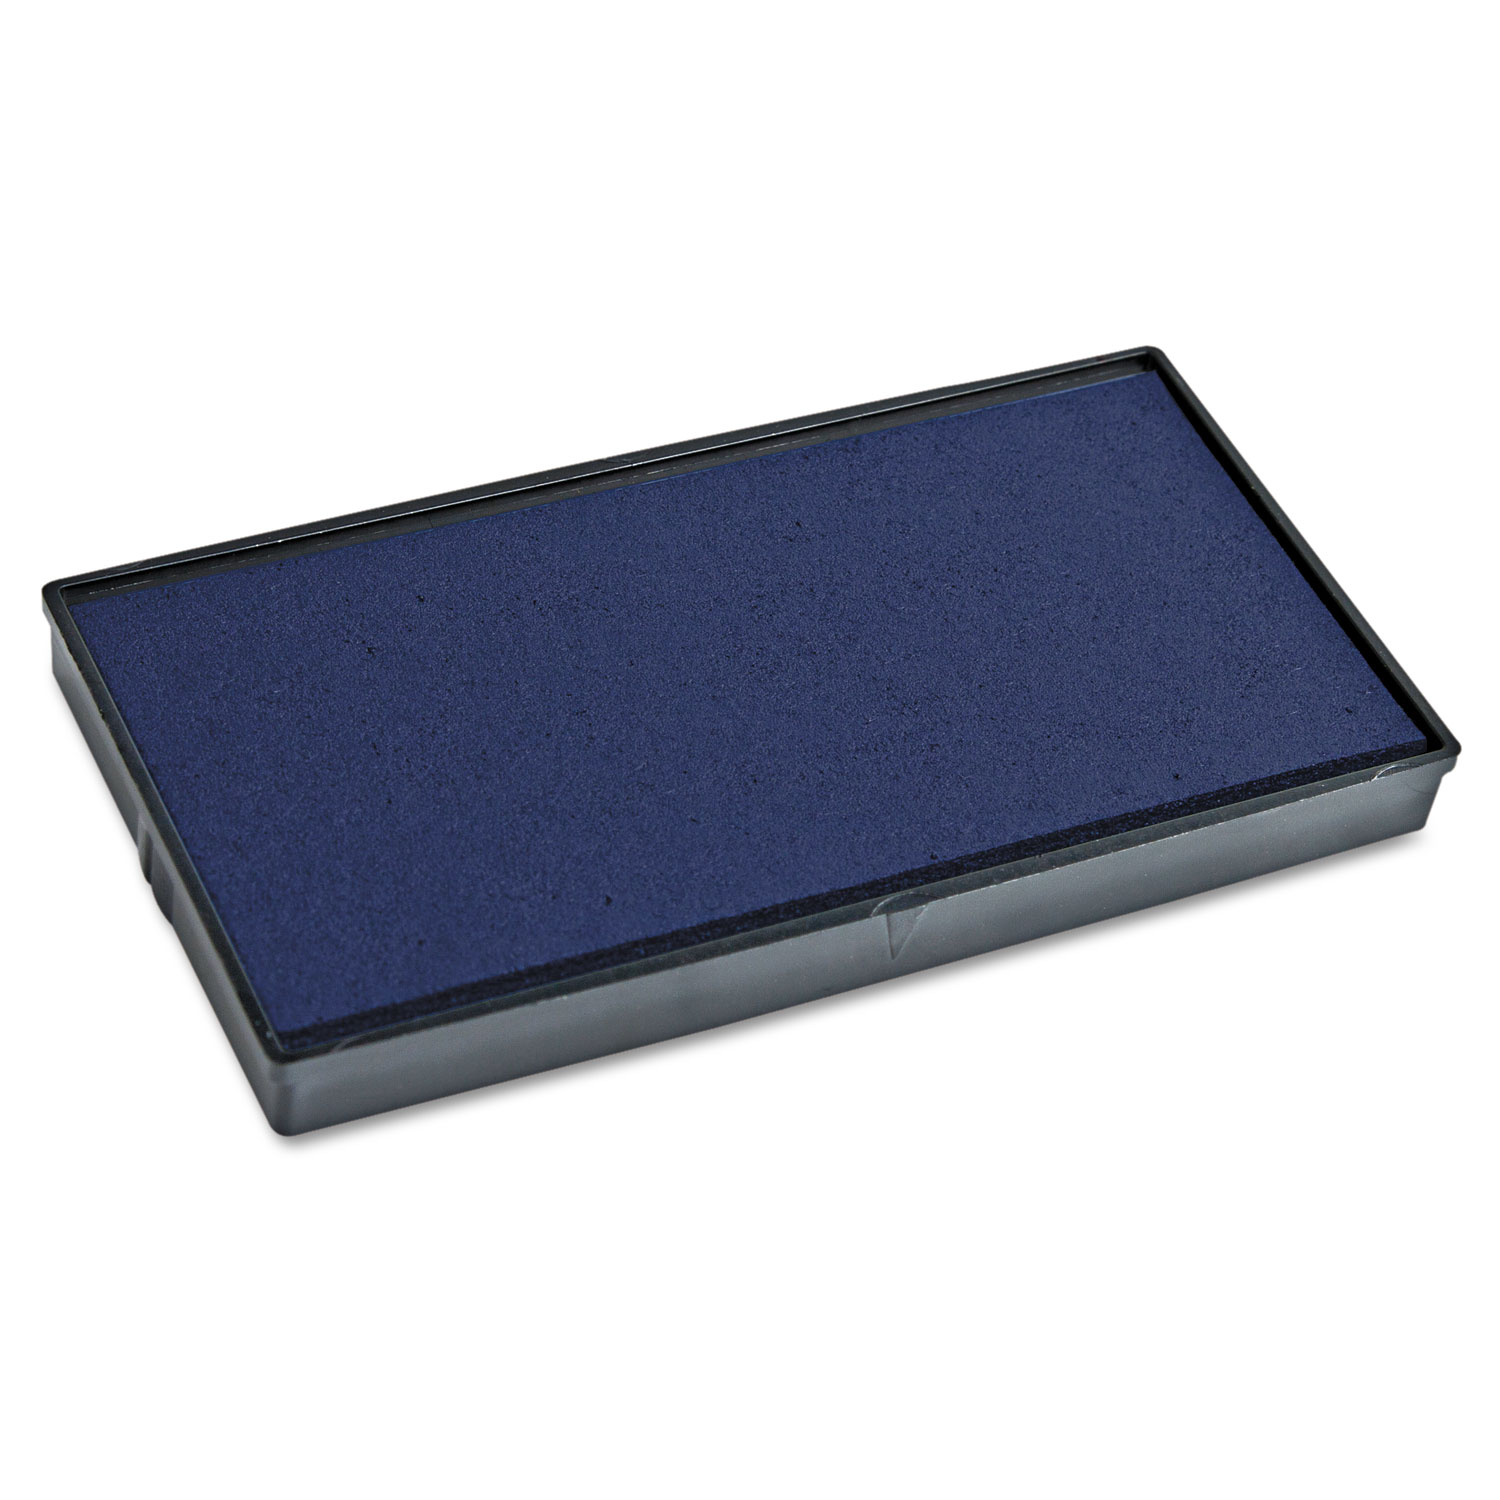 Replacement Ink Pad for 2000PLUS 1SI40PGL & 1SI40P, Blue